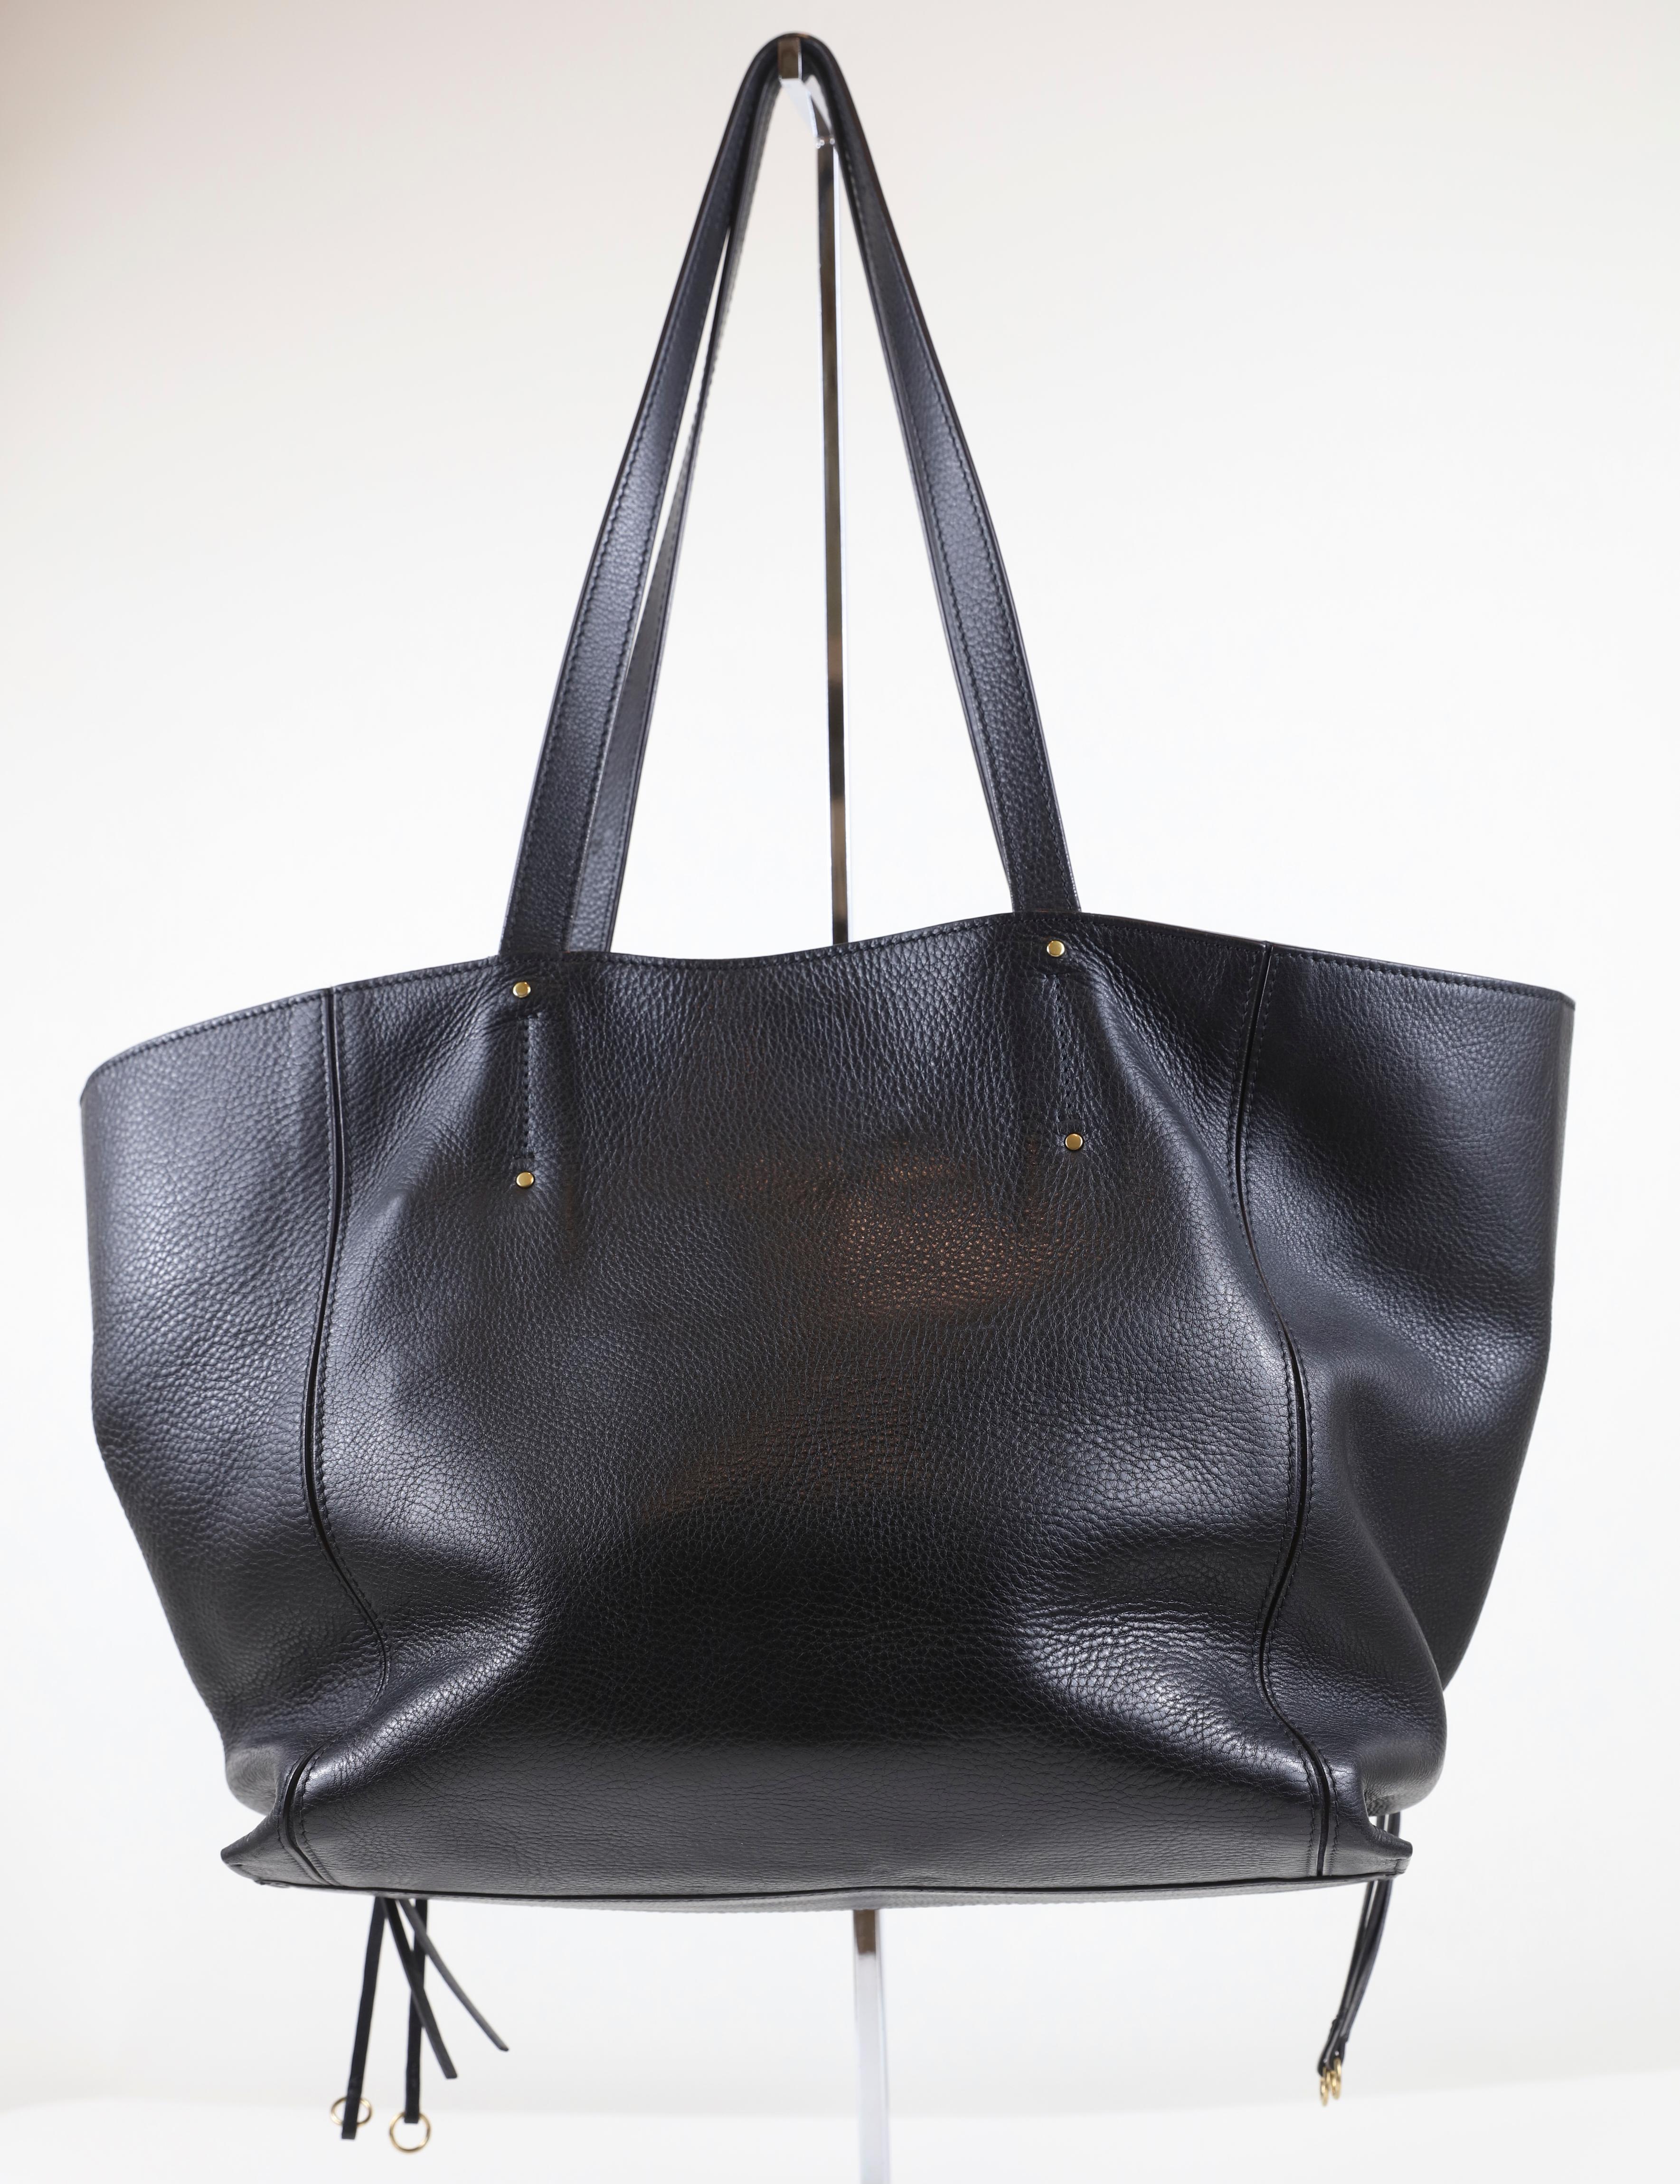 Beautiful leather tote bag by Chloe. The exact year of manufacture is unknown.